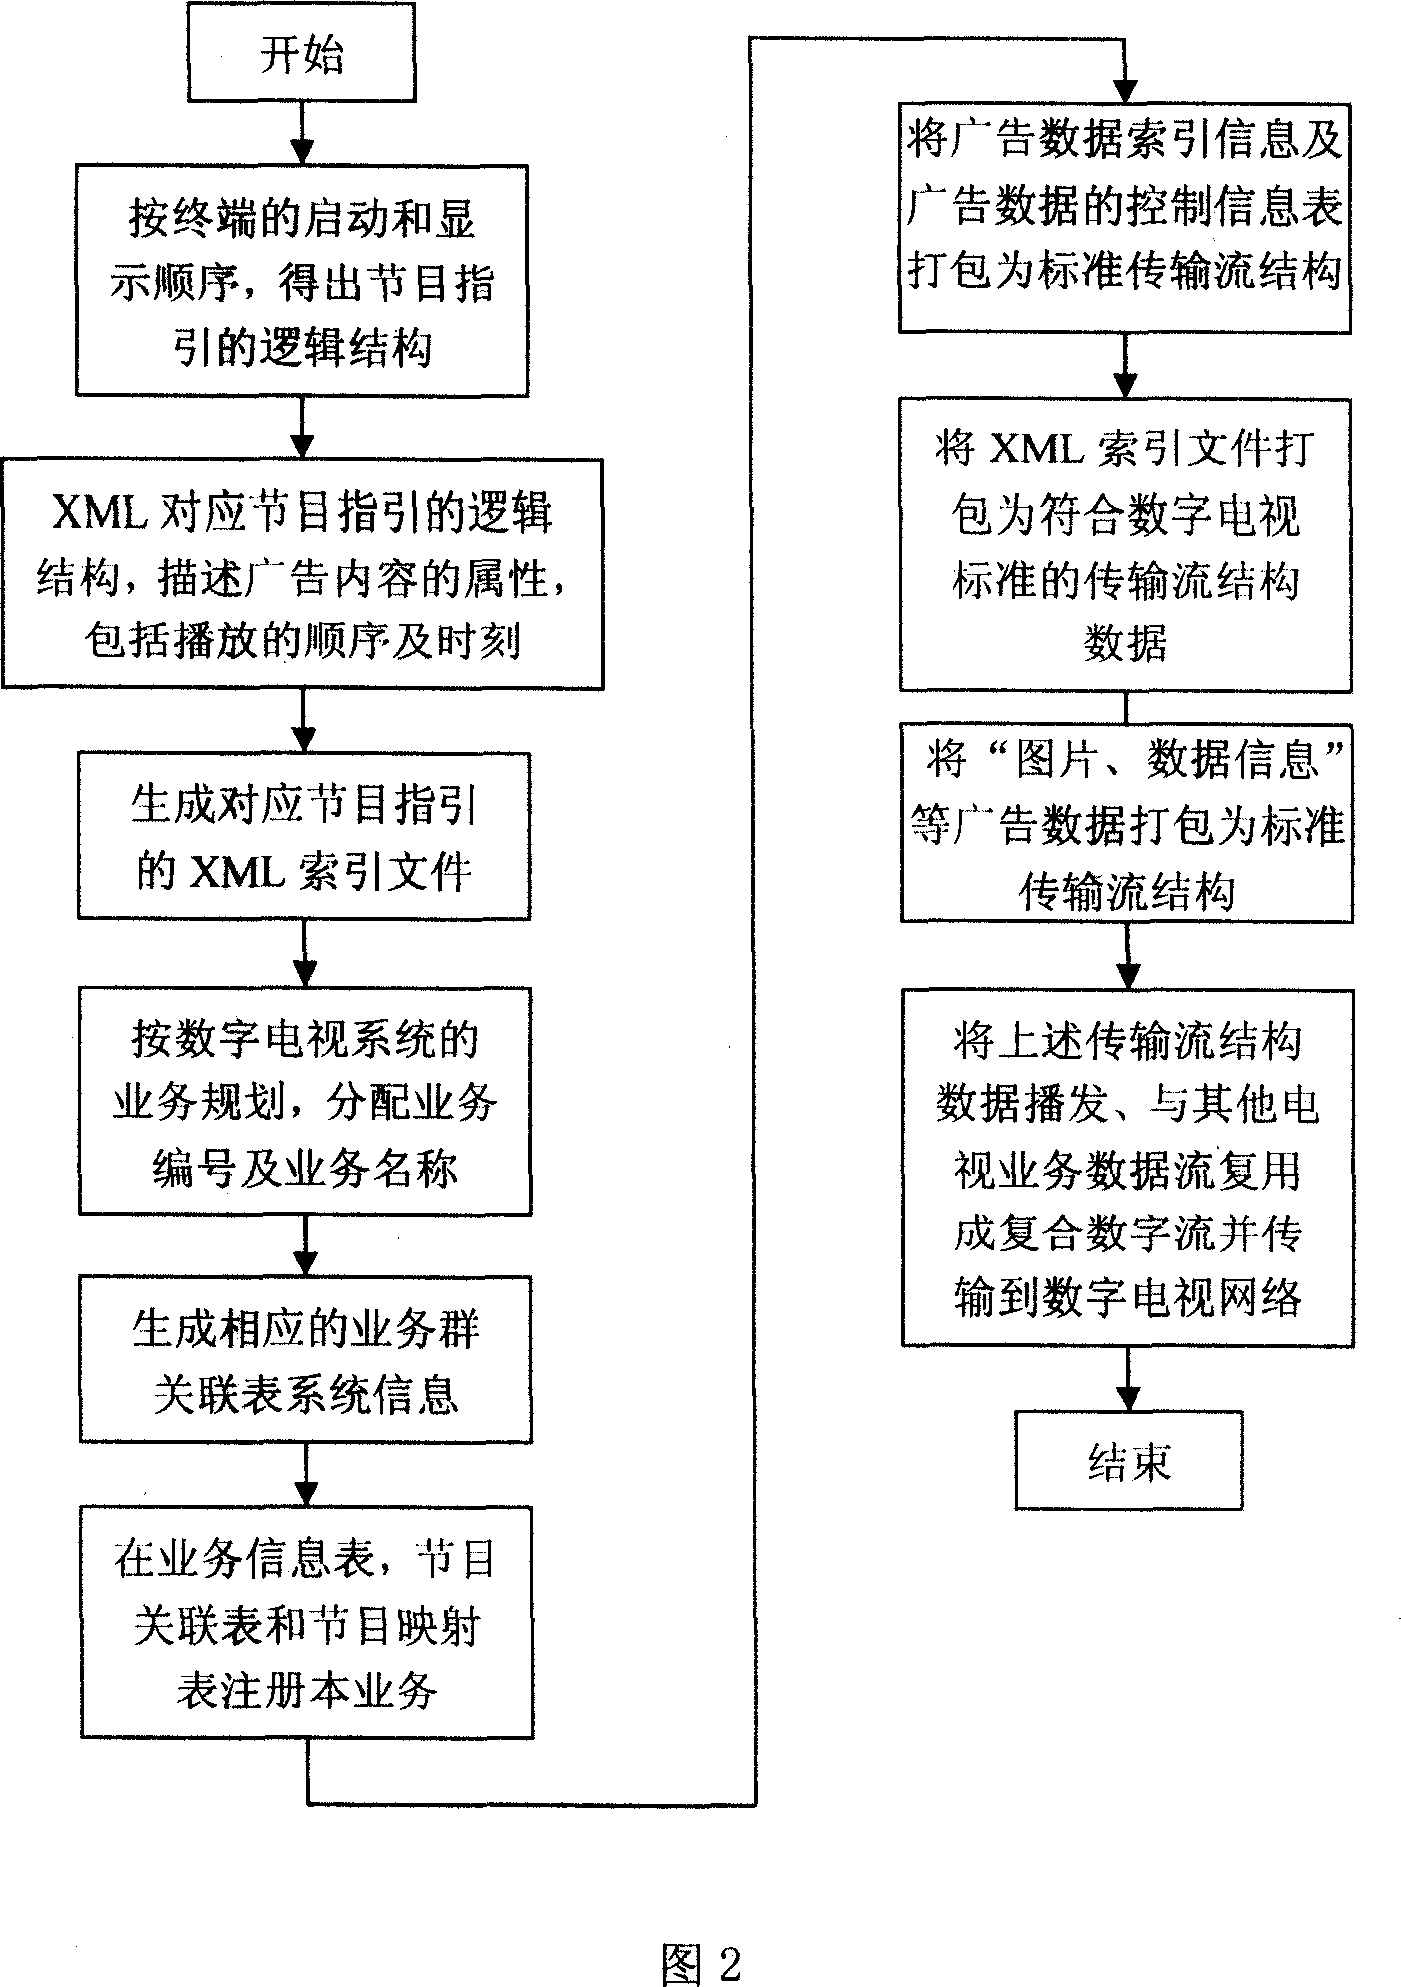 Method and apparatus for implementing digital media advertisement in digital TV system